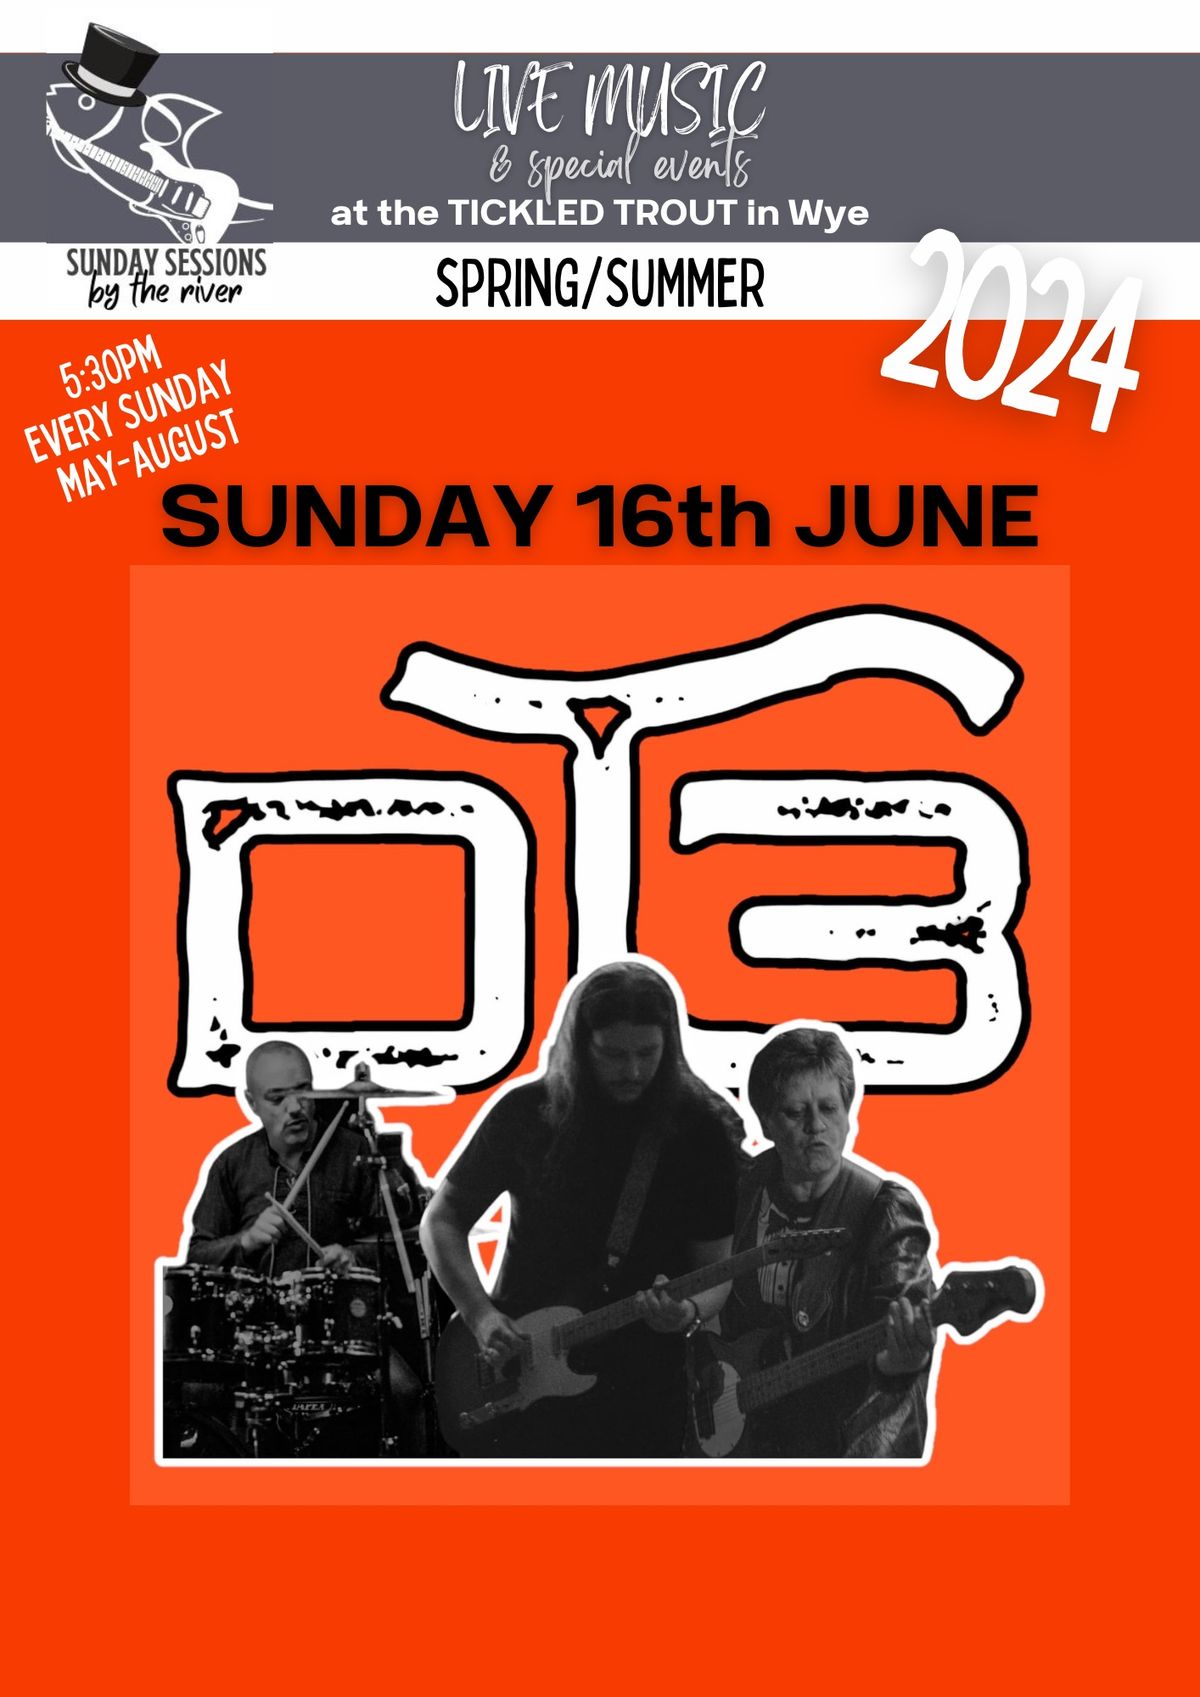 Sunday sessions by the river: DT3